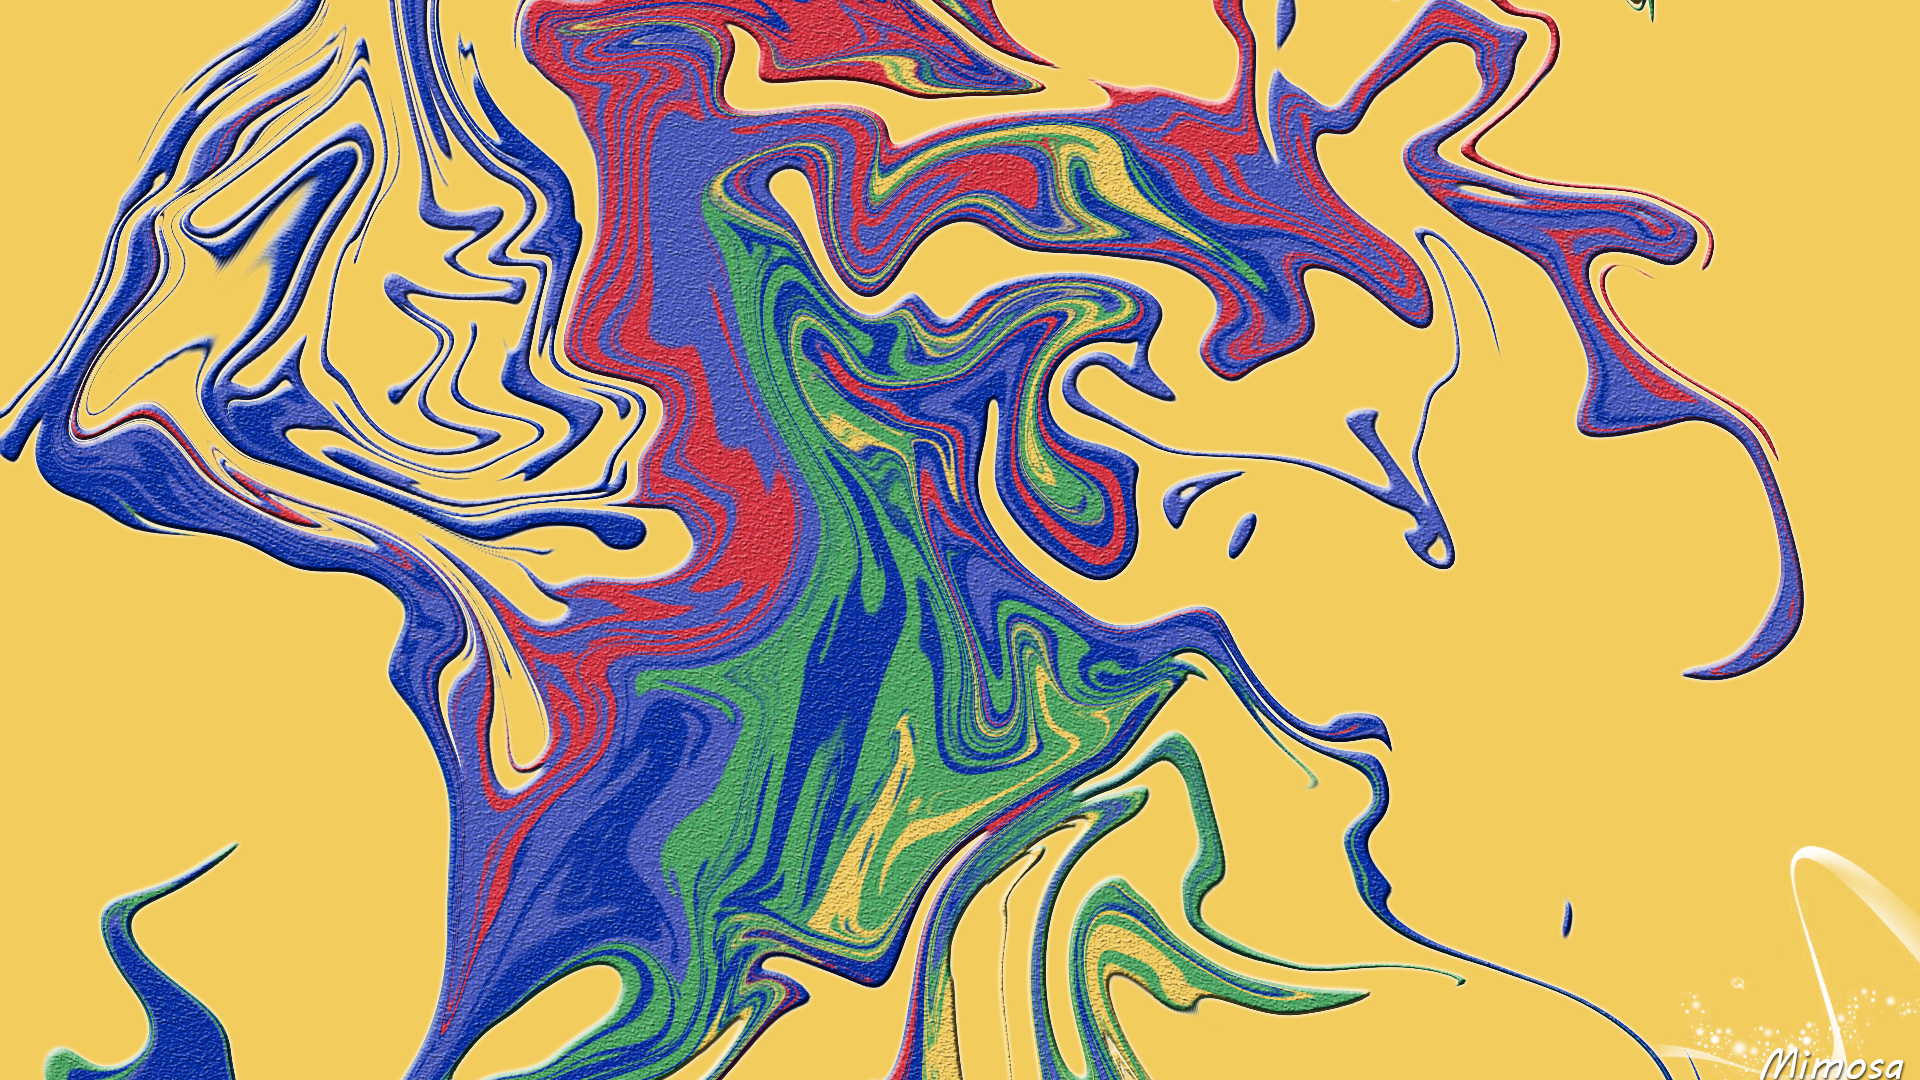 Abstract Artistic Colors Digital Art Yellow 1920x1080